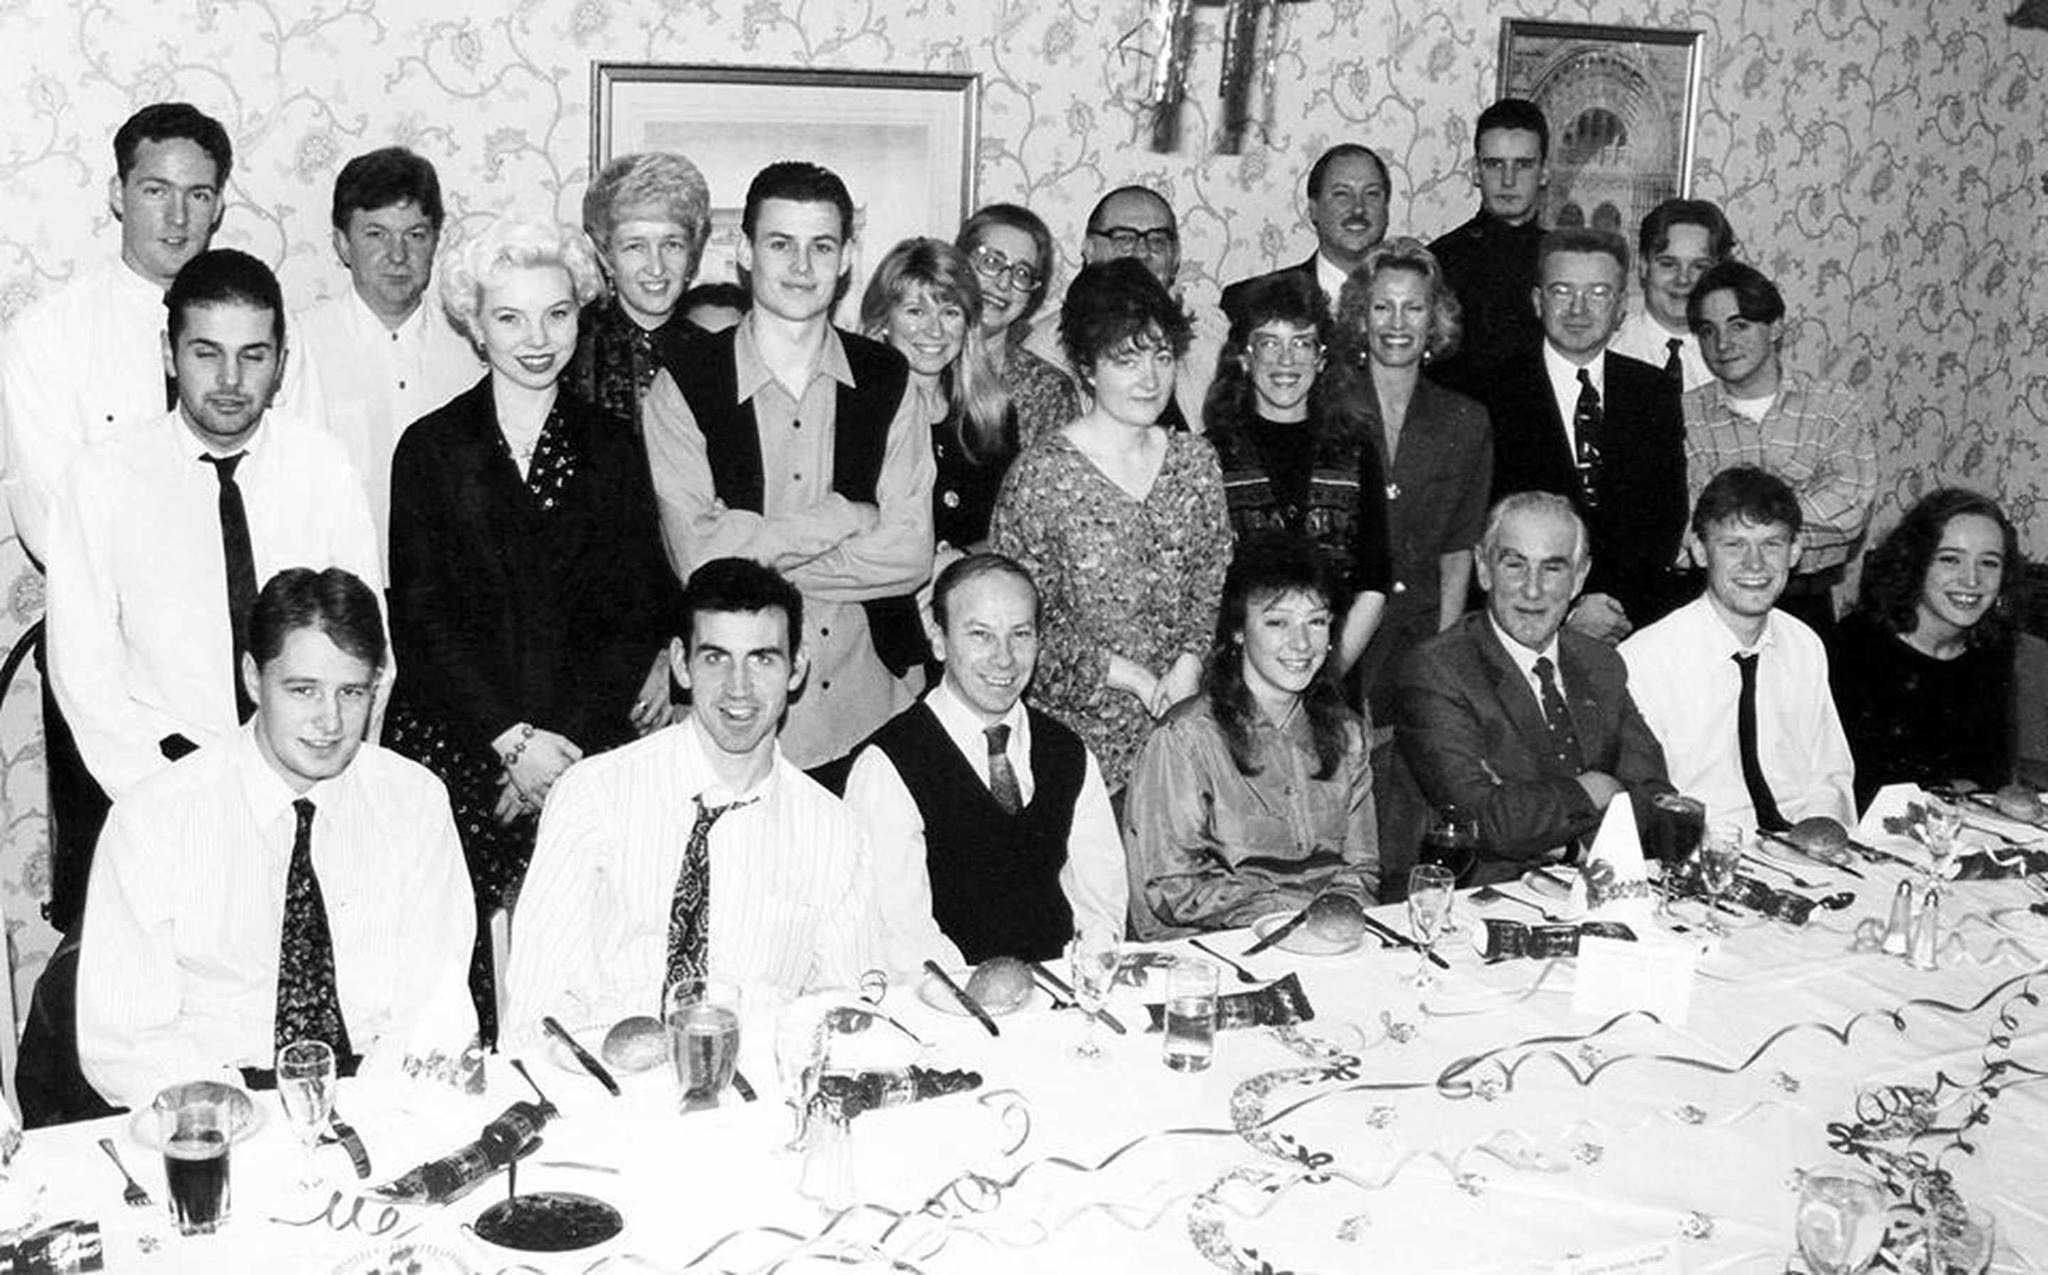 Southport Visiter staff in the 1990s